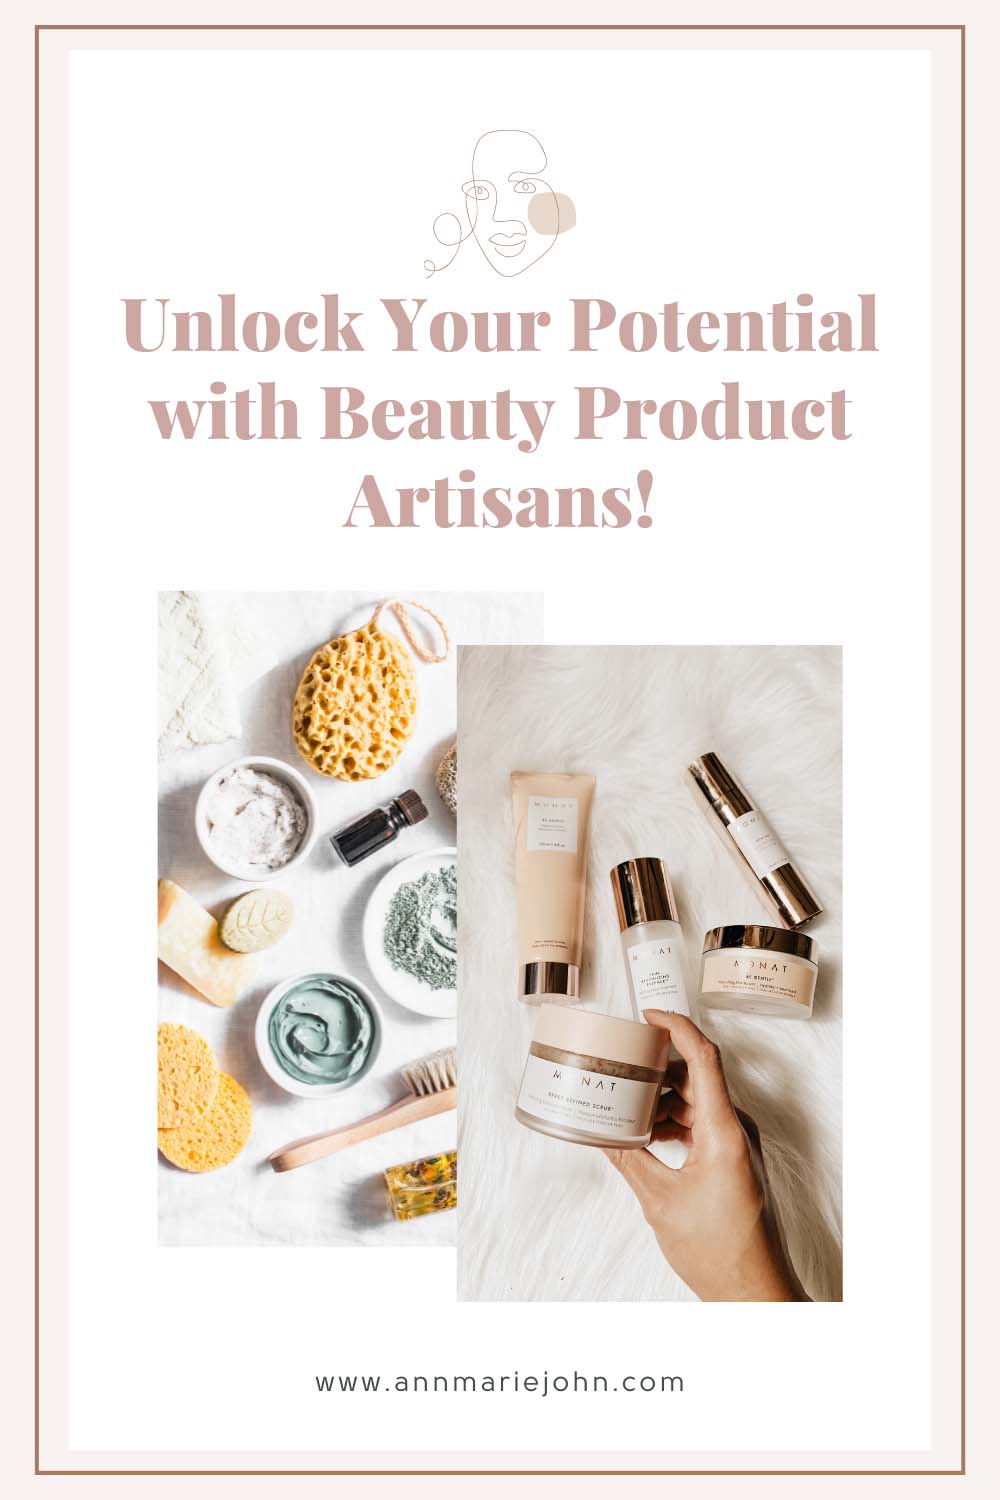 Unlock Your Potential with Beauty Product Artisans